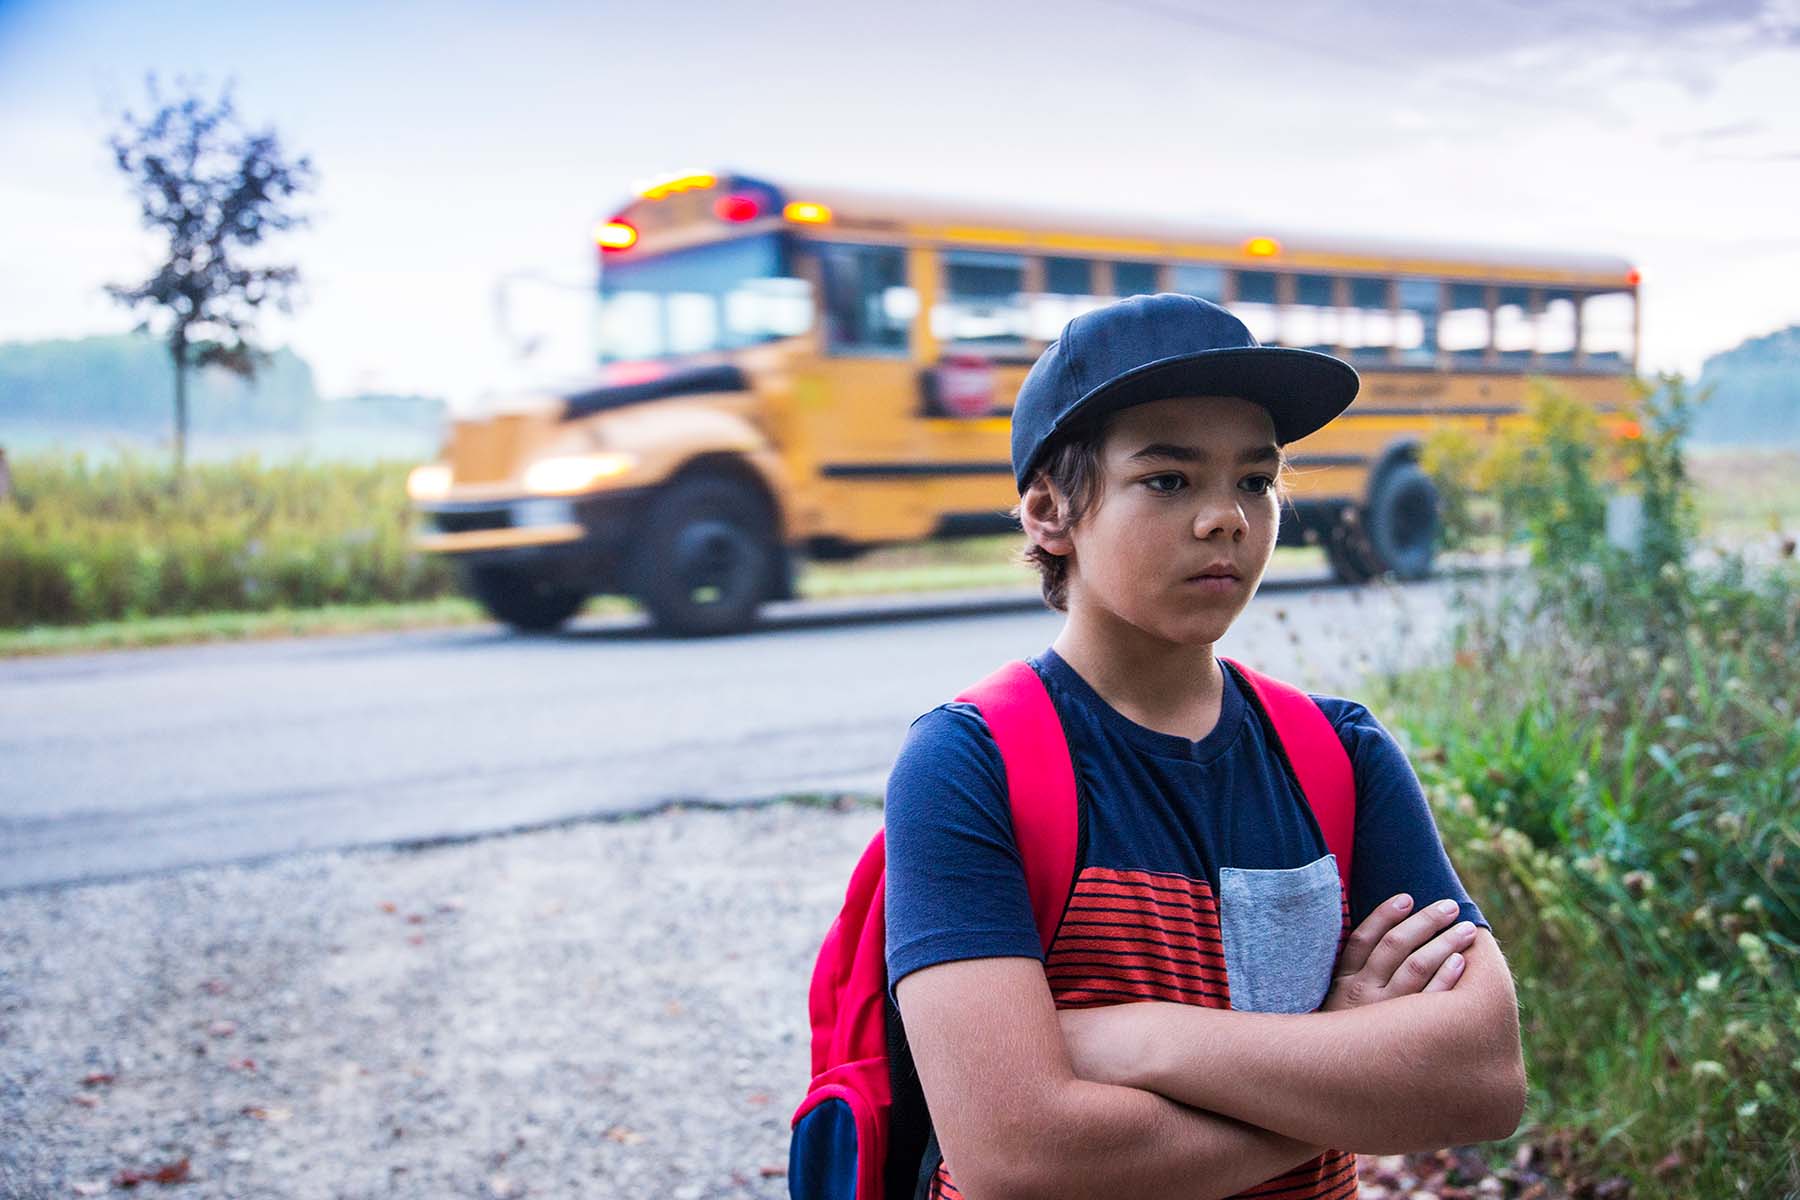 Grumpy young boy stands with his back to school bus, pouting.